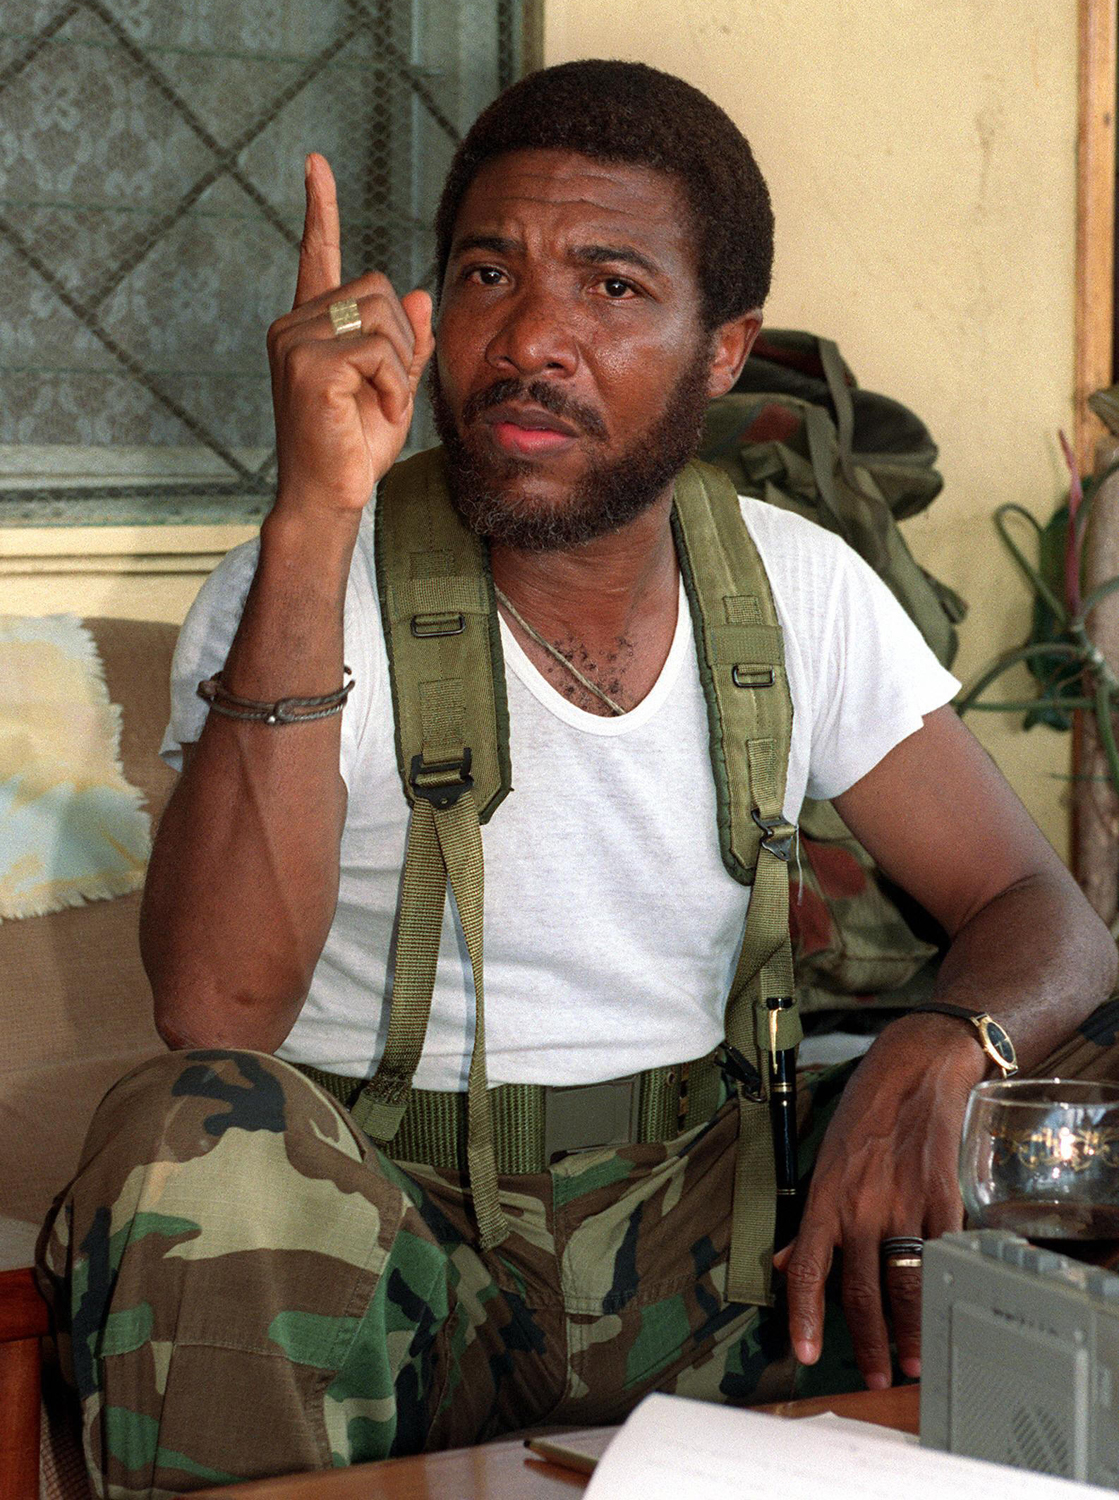 A man in military camouflage sits at a table, gesturing with one finger raised, with a serious expression on his face.